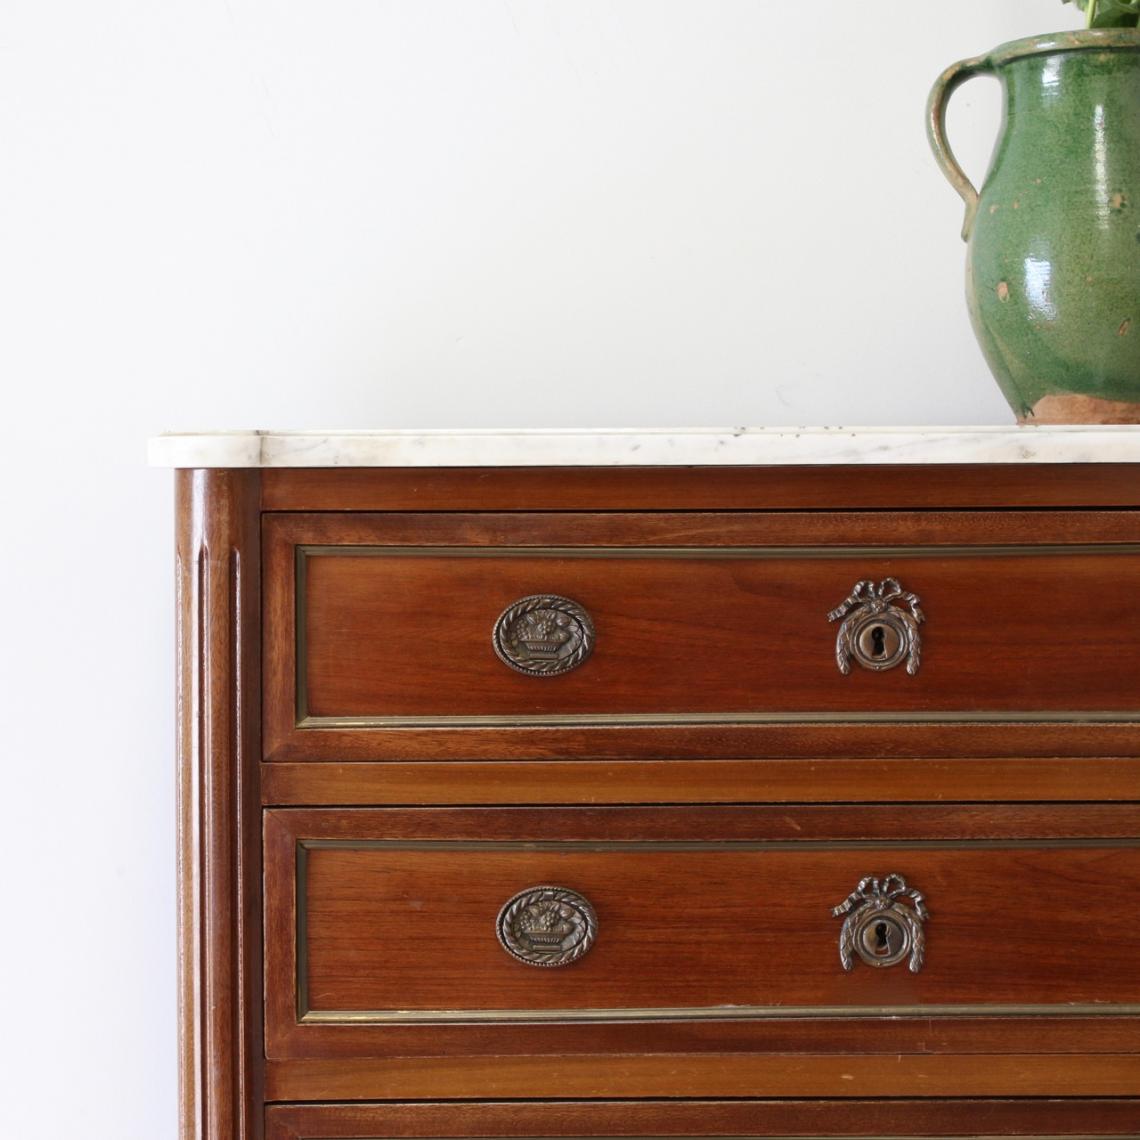 A Semainier, a French Chest of Drawers